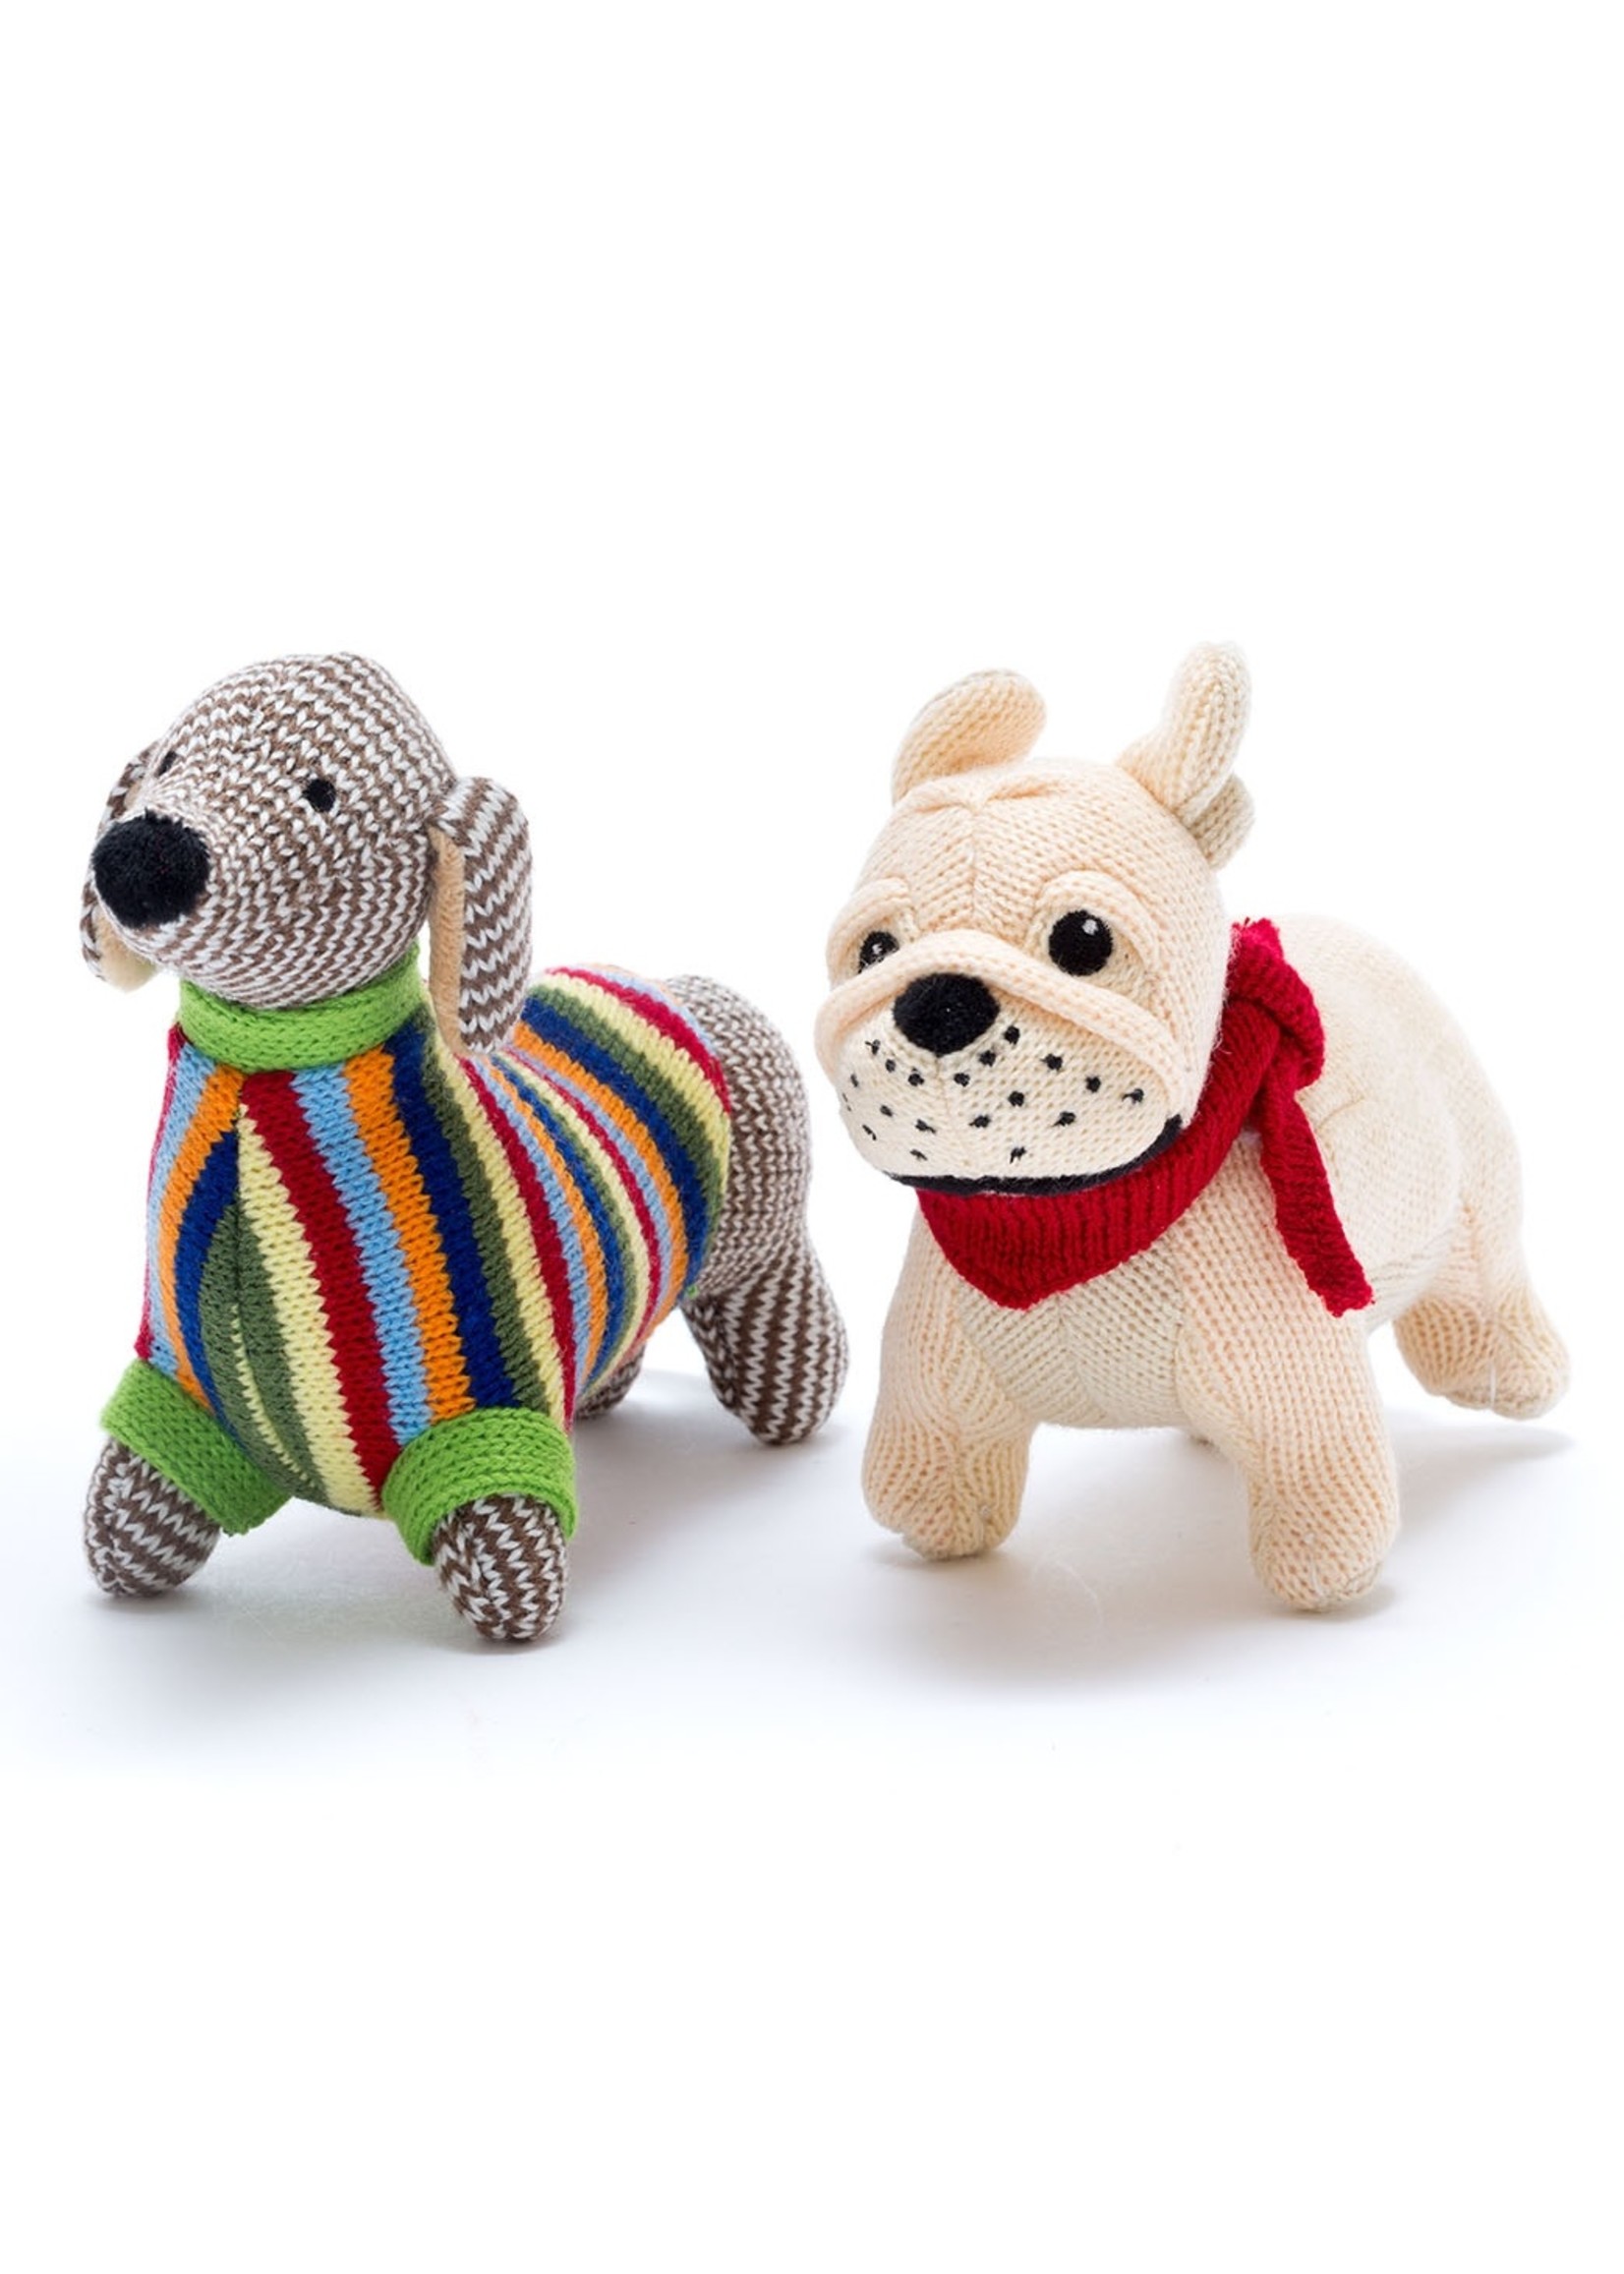 Best Years Ltd Knitted French Bulldog Baby Rattle